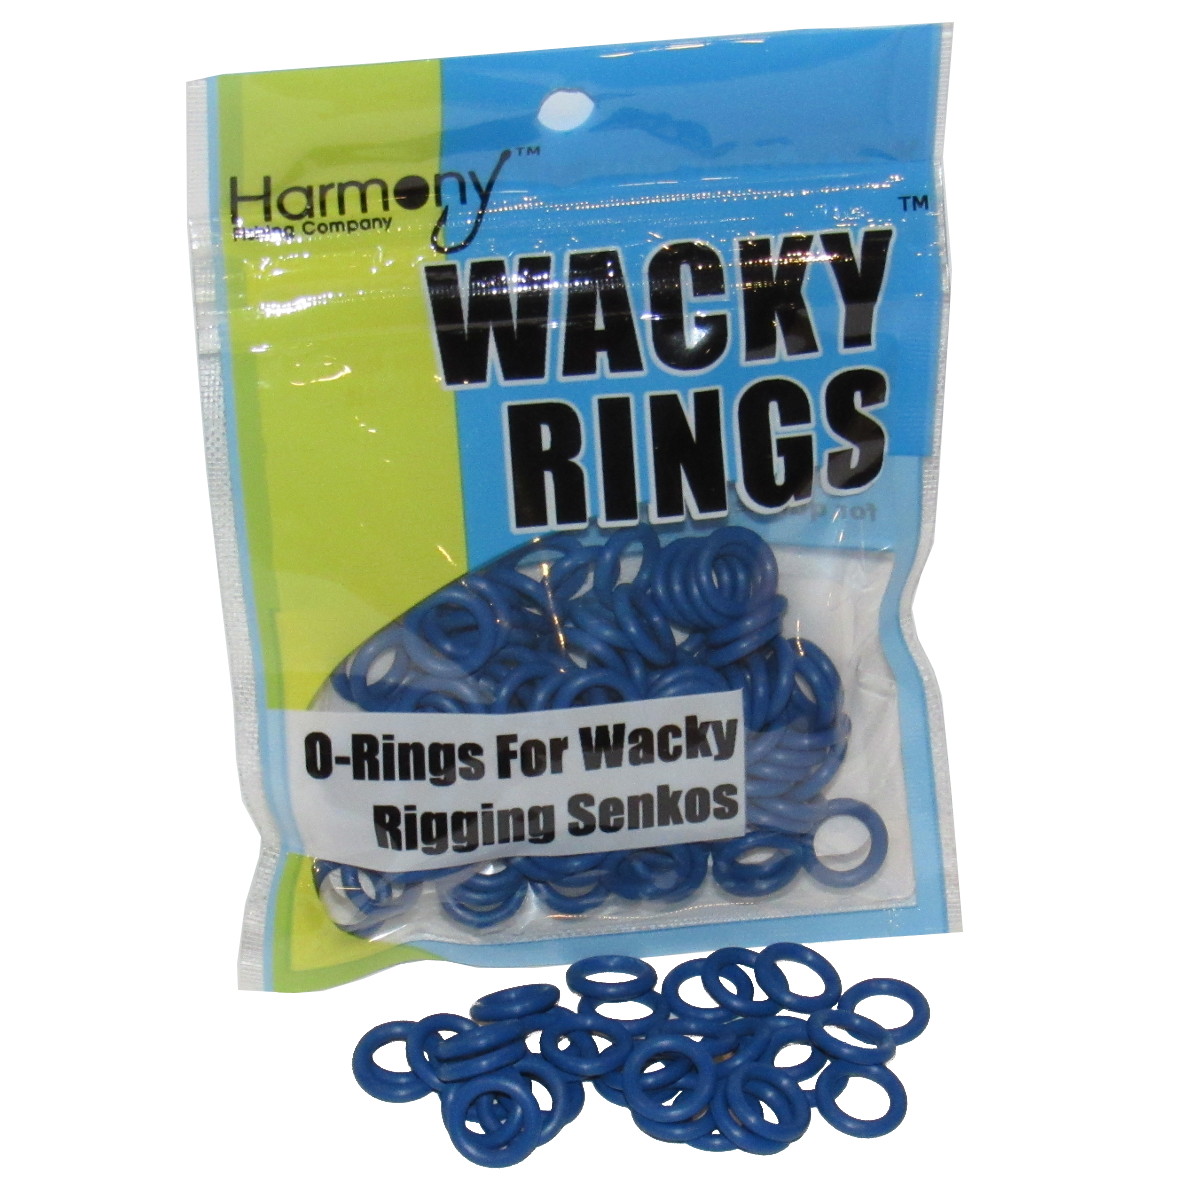 Wacky Rings (100 pk - O-Rings for Wacky Rigging Senko Worms/Soft Stickbaits  – Bait Saver Orings for 4&5” Senko Style Worms - Save Your Worms from